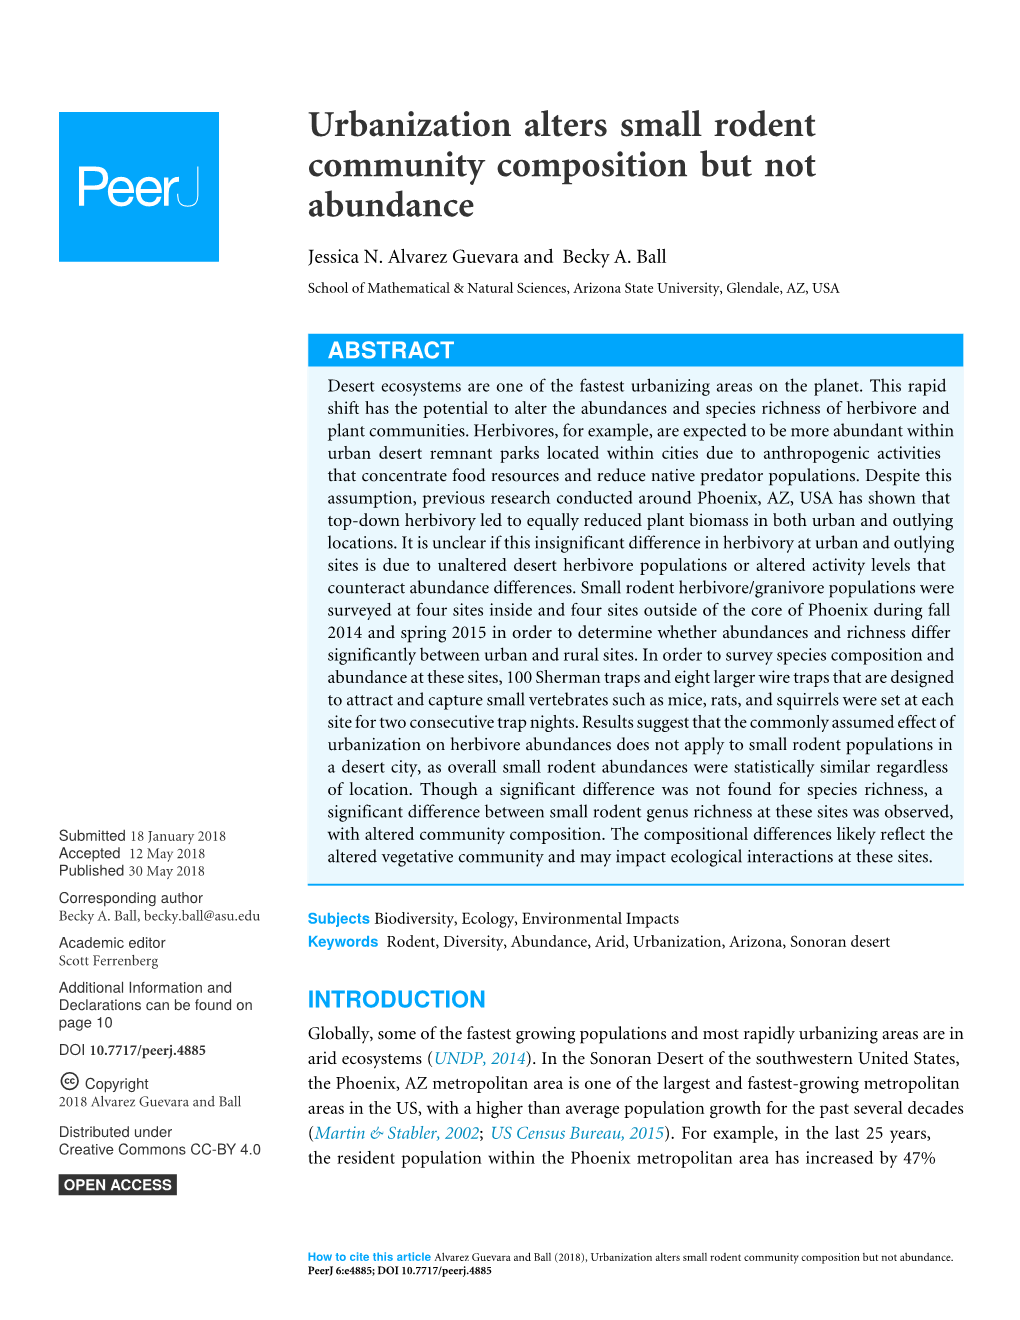 Urbanization Alters Small Rodent Community Composition but Not Abundance